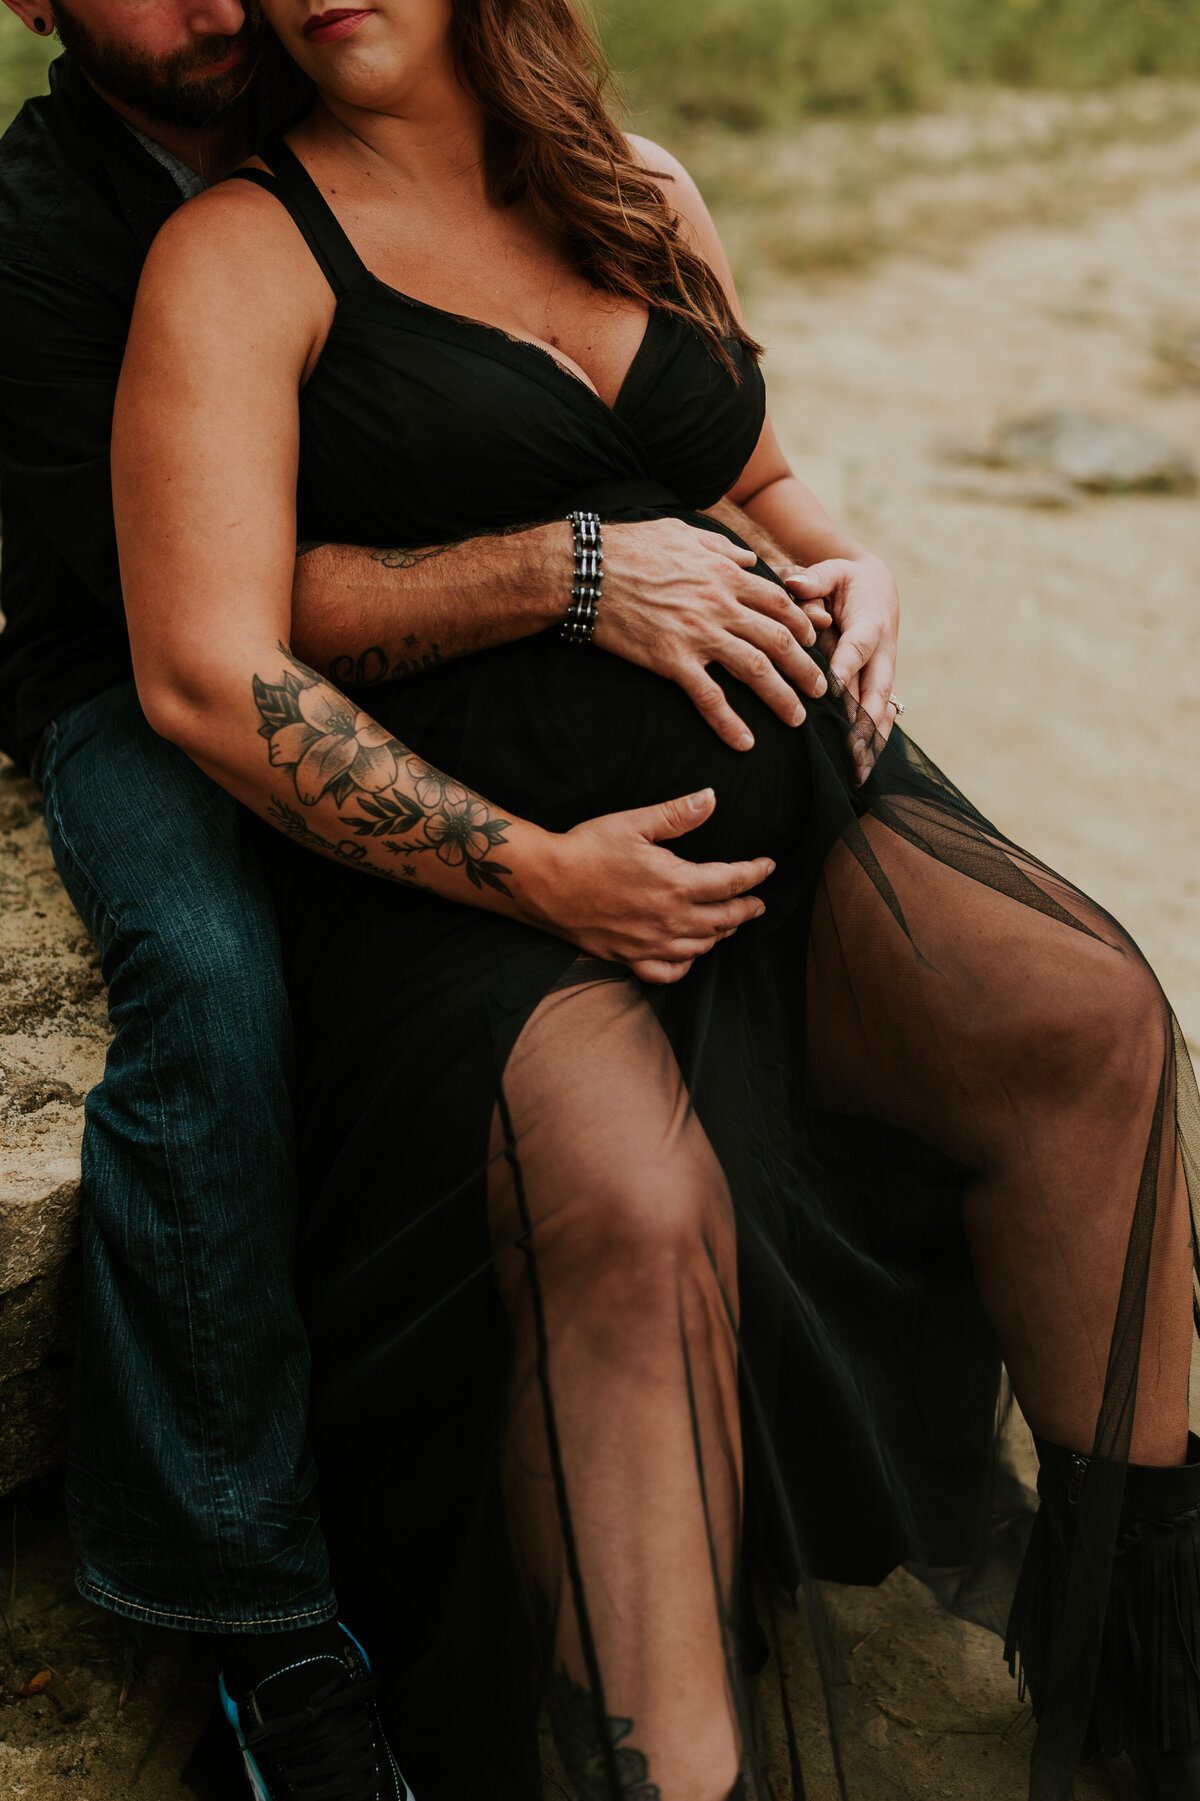 Bask in the splendor of nature with our outdoor maternity sessions. Shannon Kathleen Photography captures the blossoming beauty of your maternity journey. Book your session now.